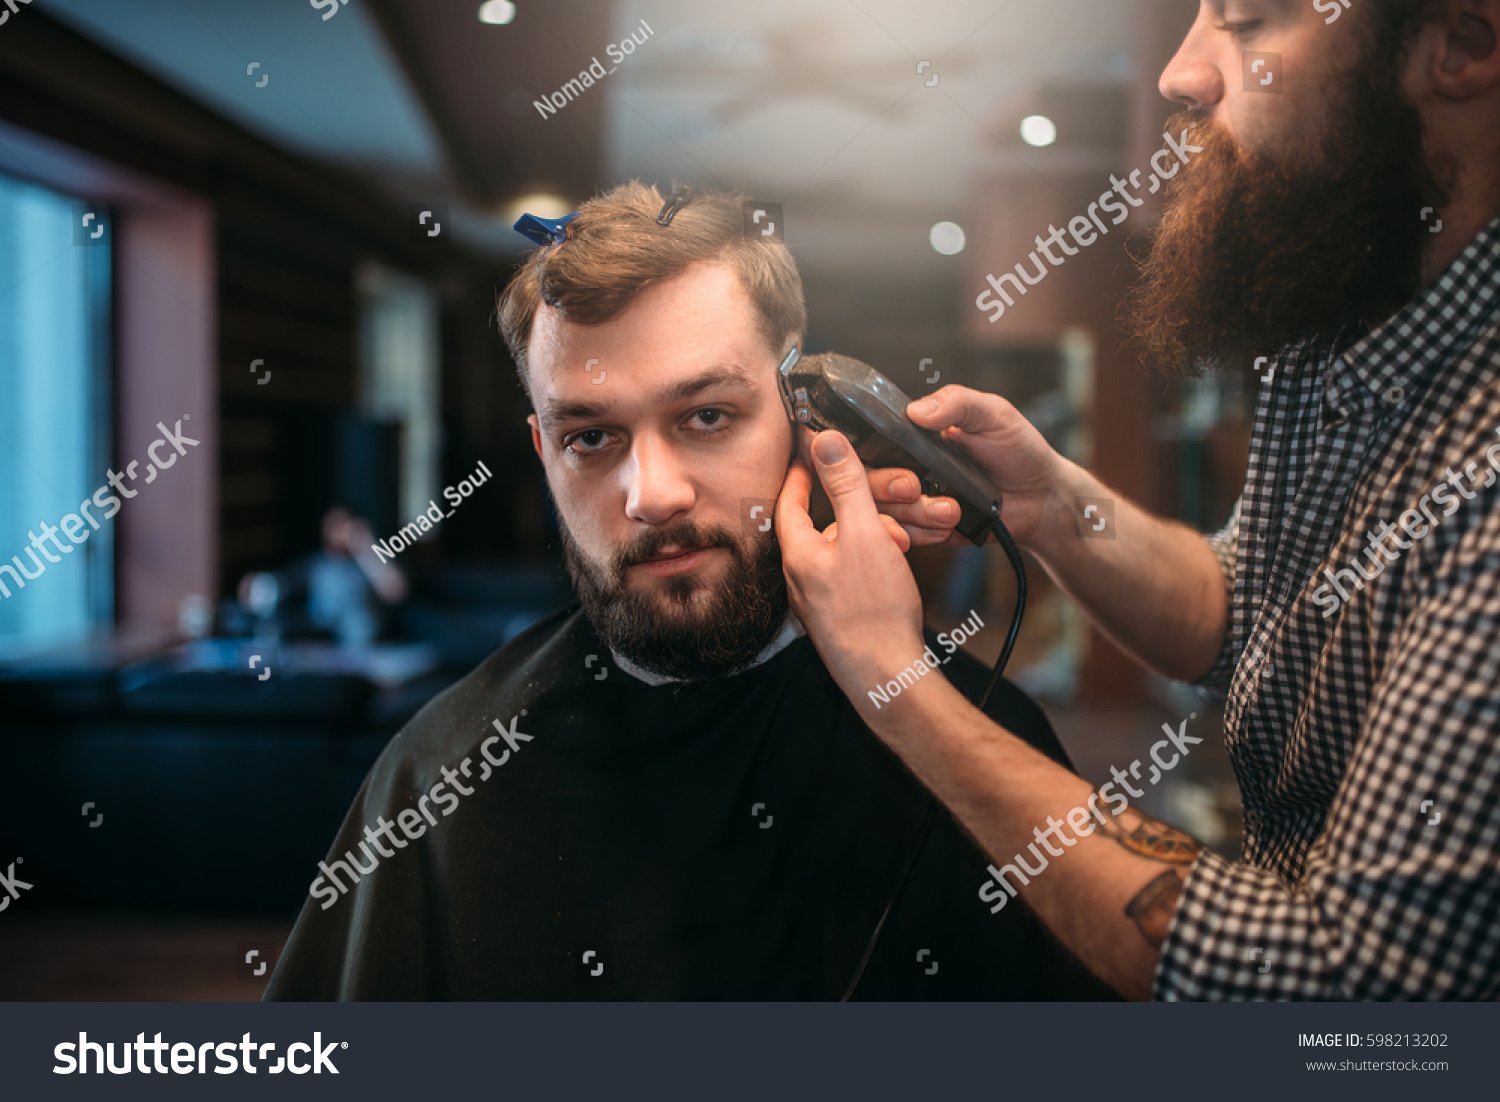 Barber trimming hair of the client man by clipper #598213202